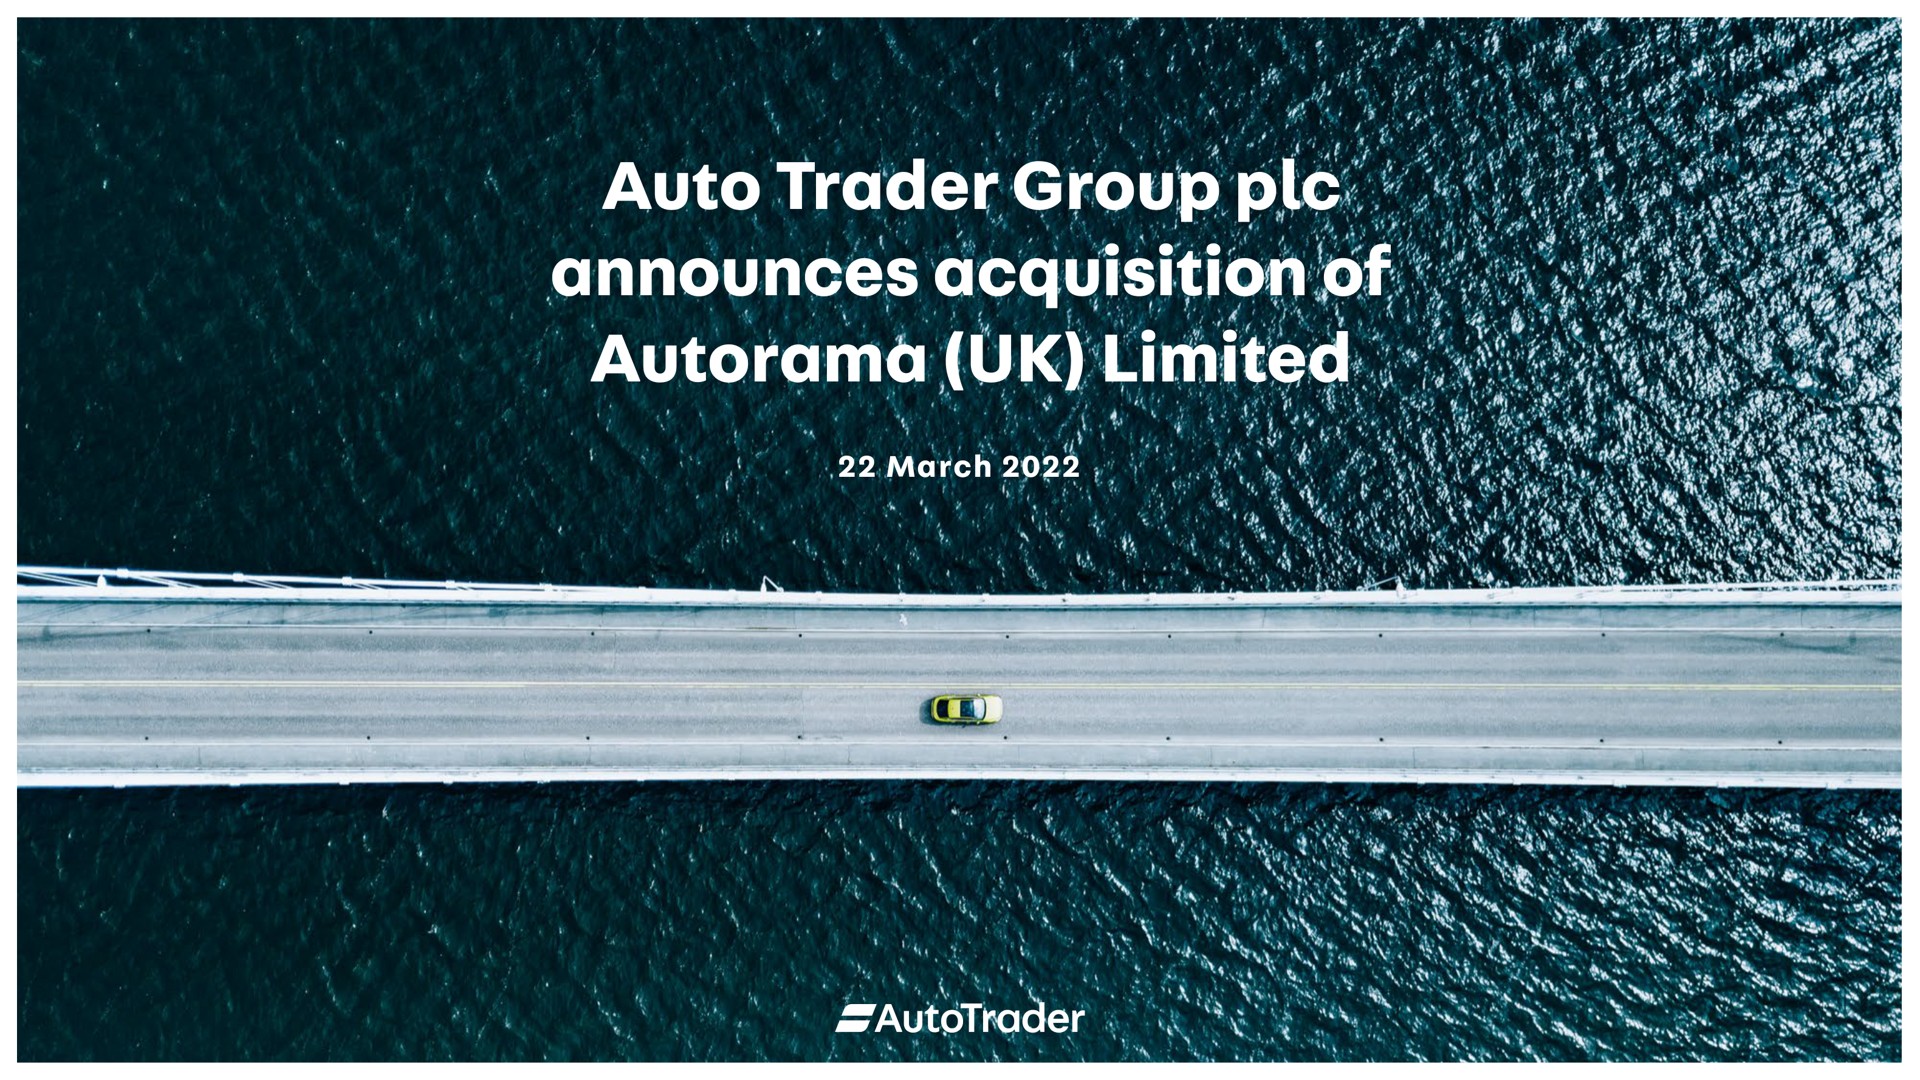 auto trader group announces acquisition of limited may dun | Auto Trader Group